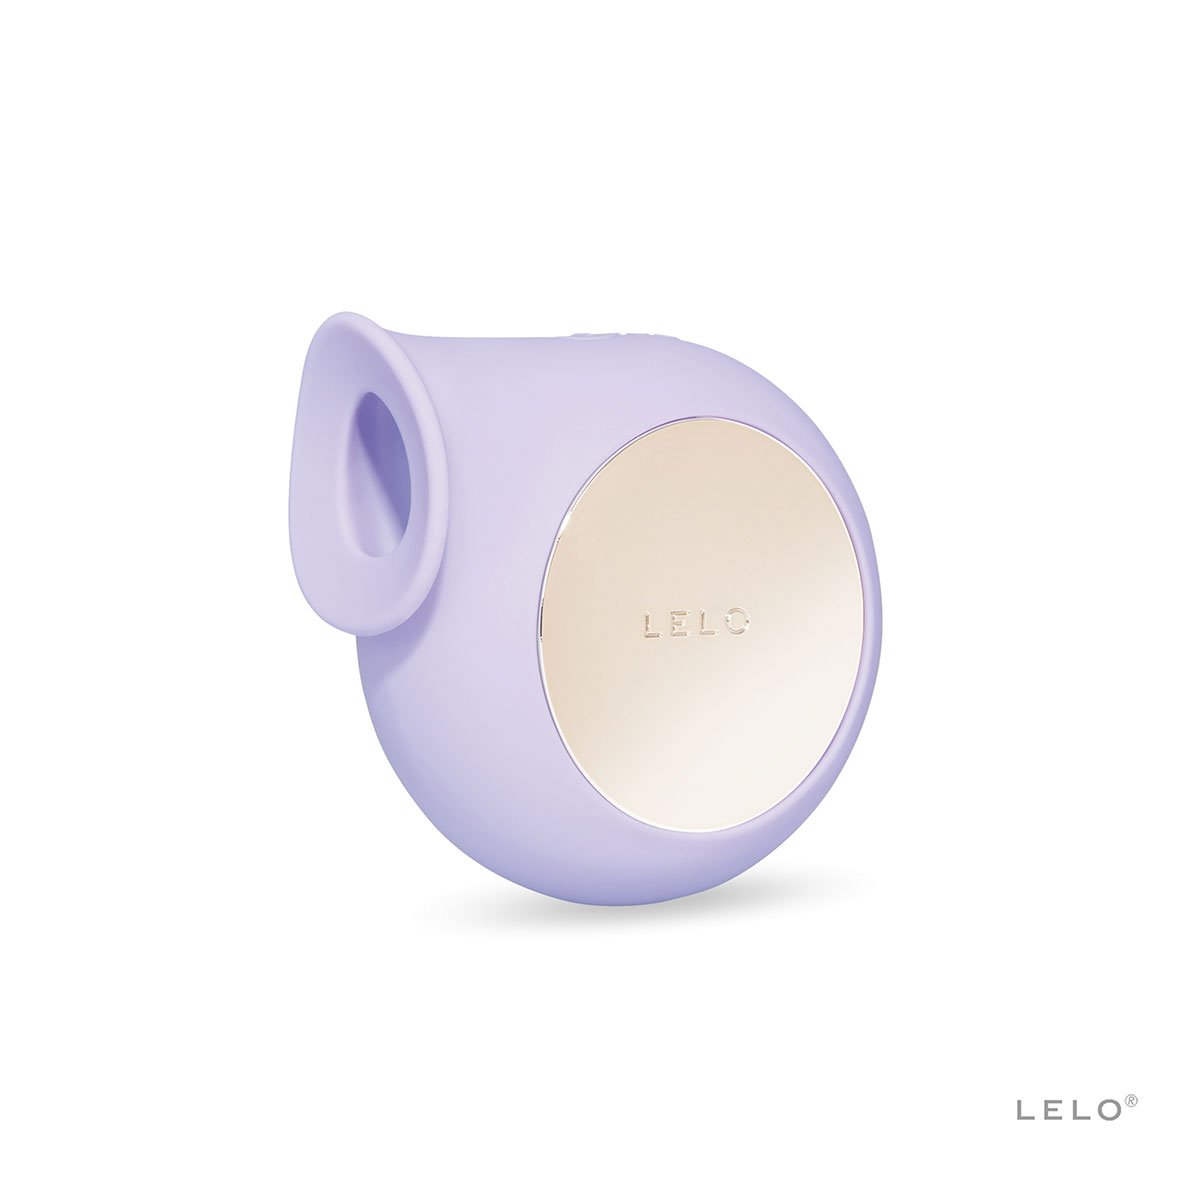 LELO Sila - Buy At Luxury Toy X - Free 3-Day Shipping